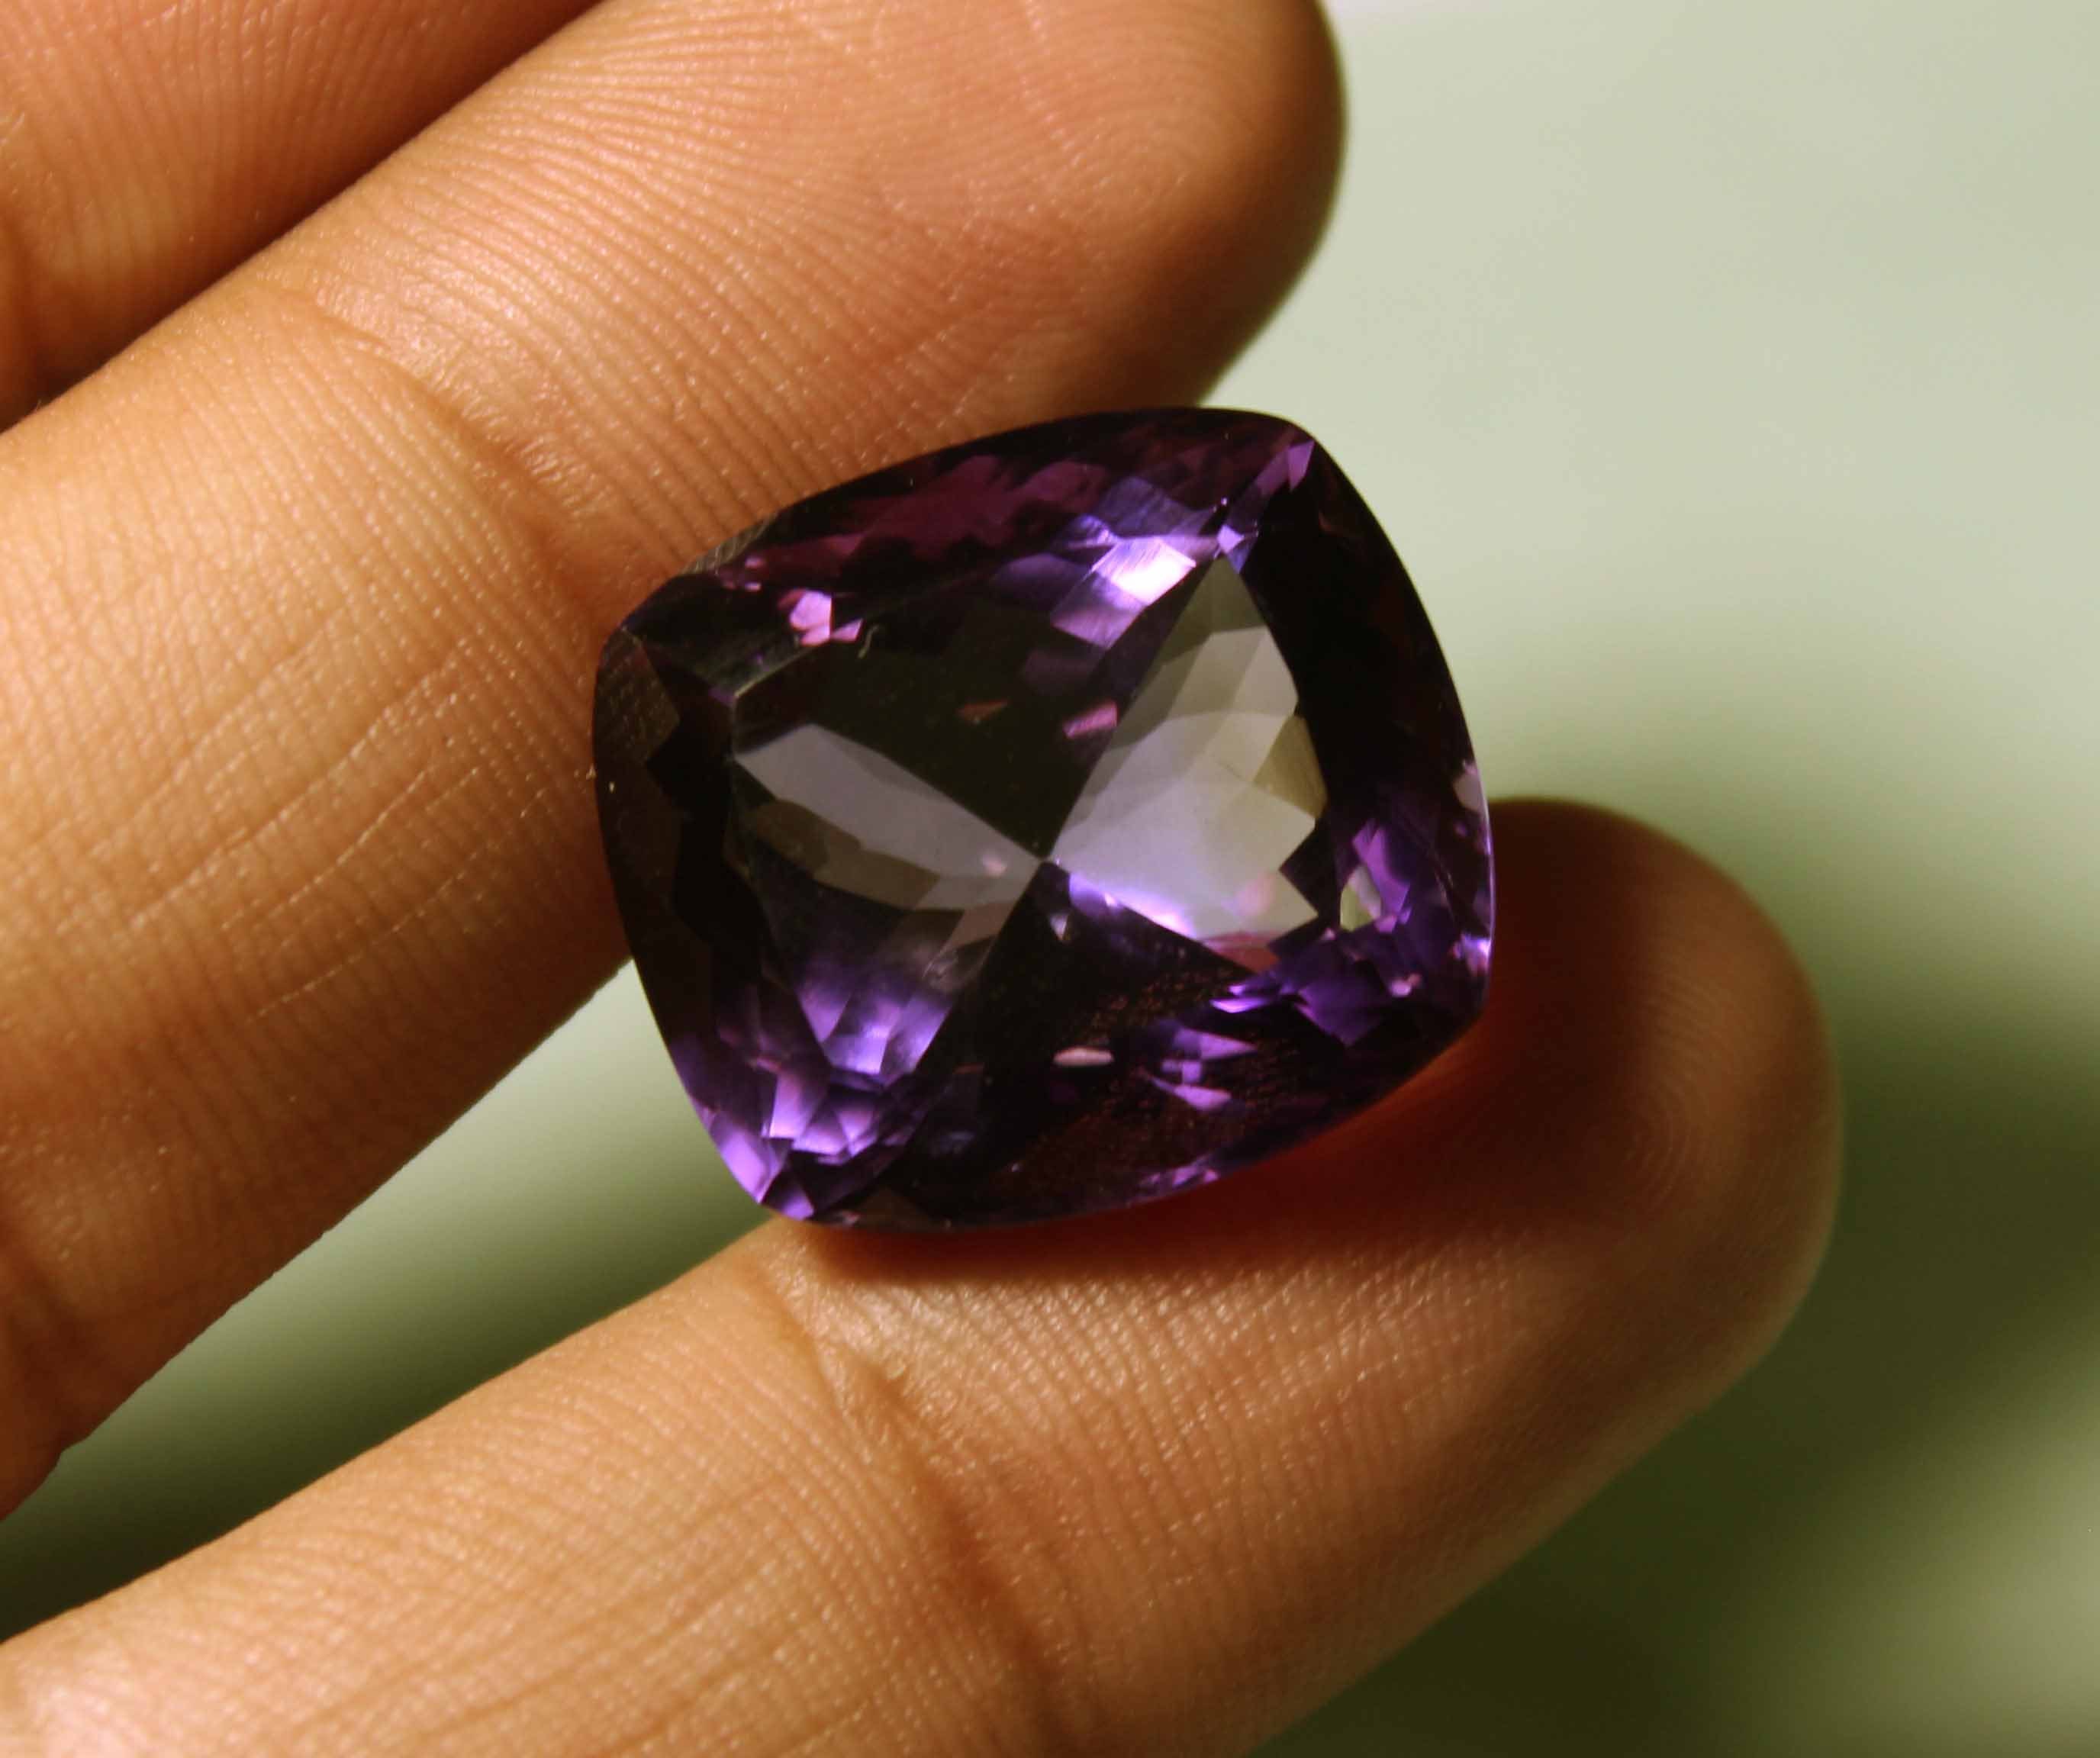 Natural Amethyst Gemstone,Faceted Amethyst Stone,AAA Quality Amethyst,Purple Amethyst,Amethyst Square Faceted Cut Stone,10x10x7.20MM,5.40Crt